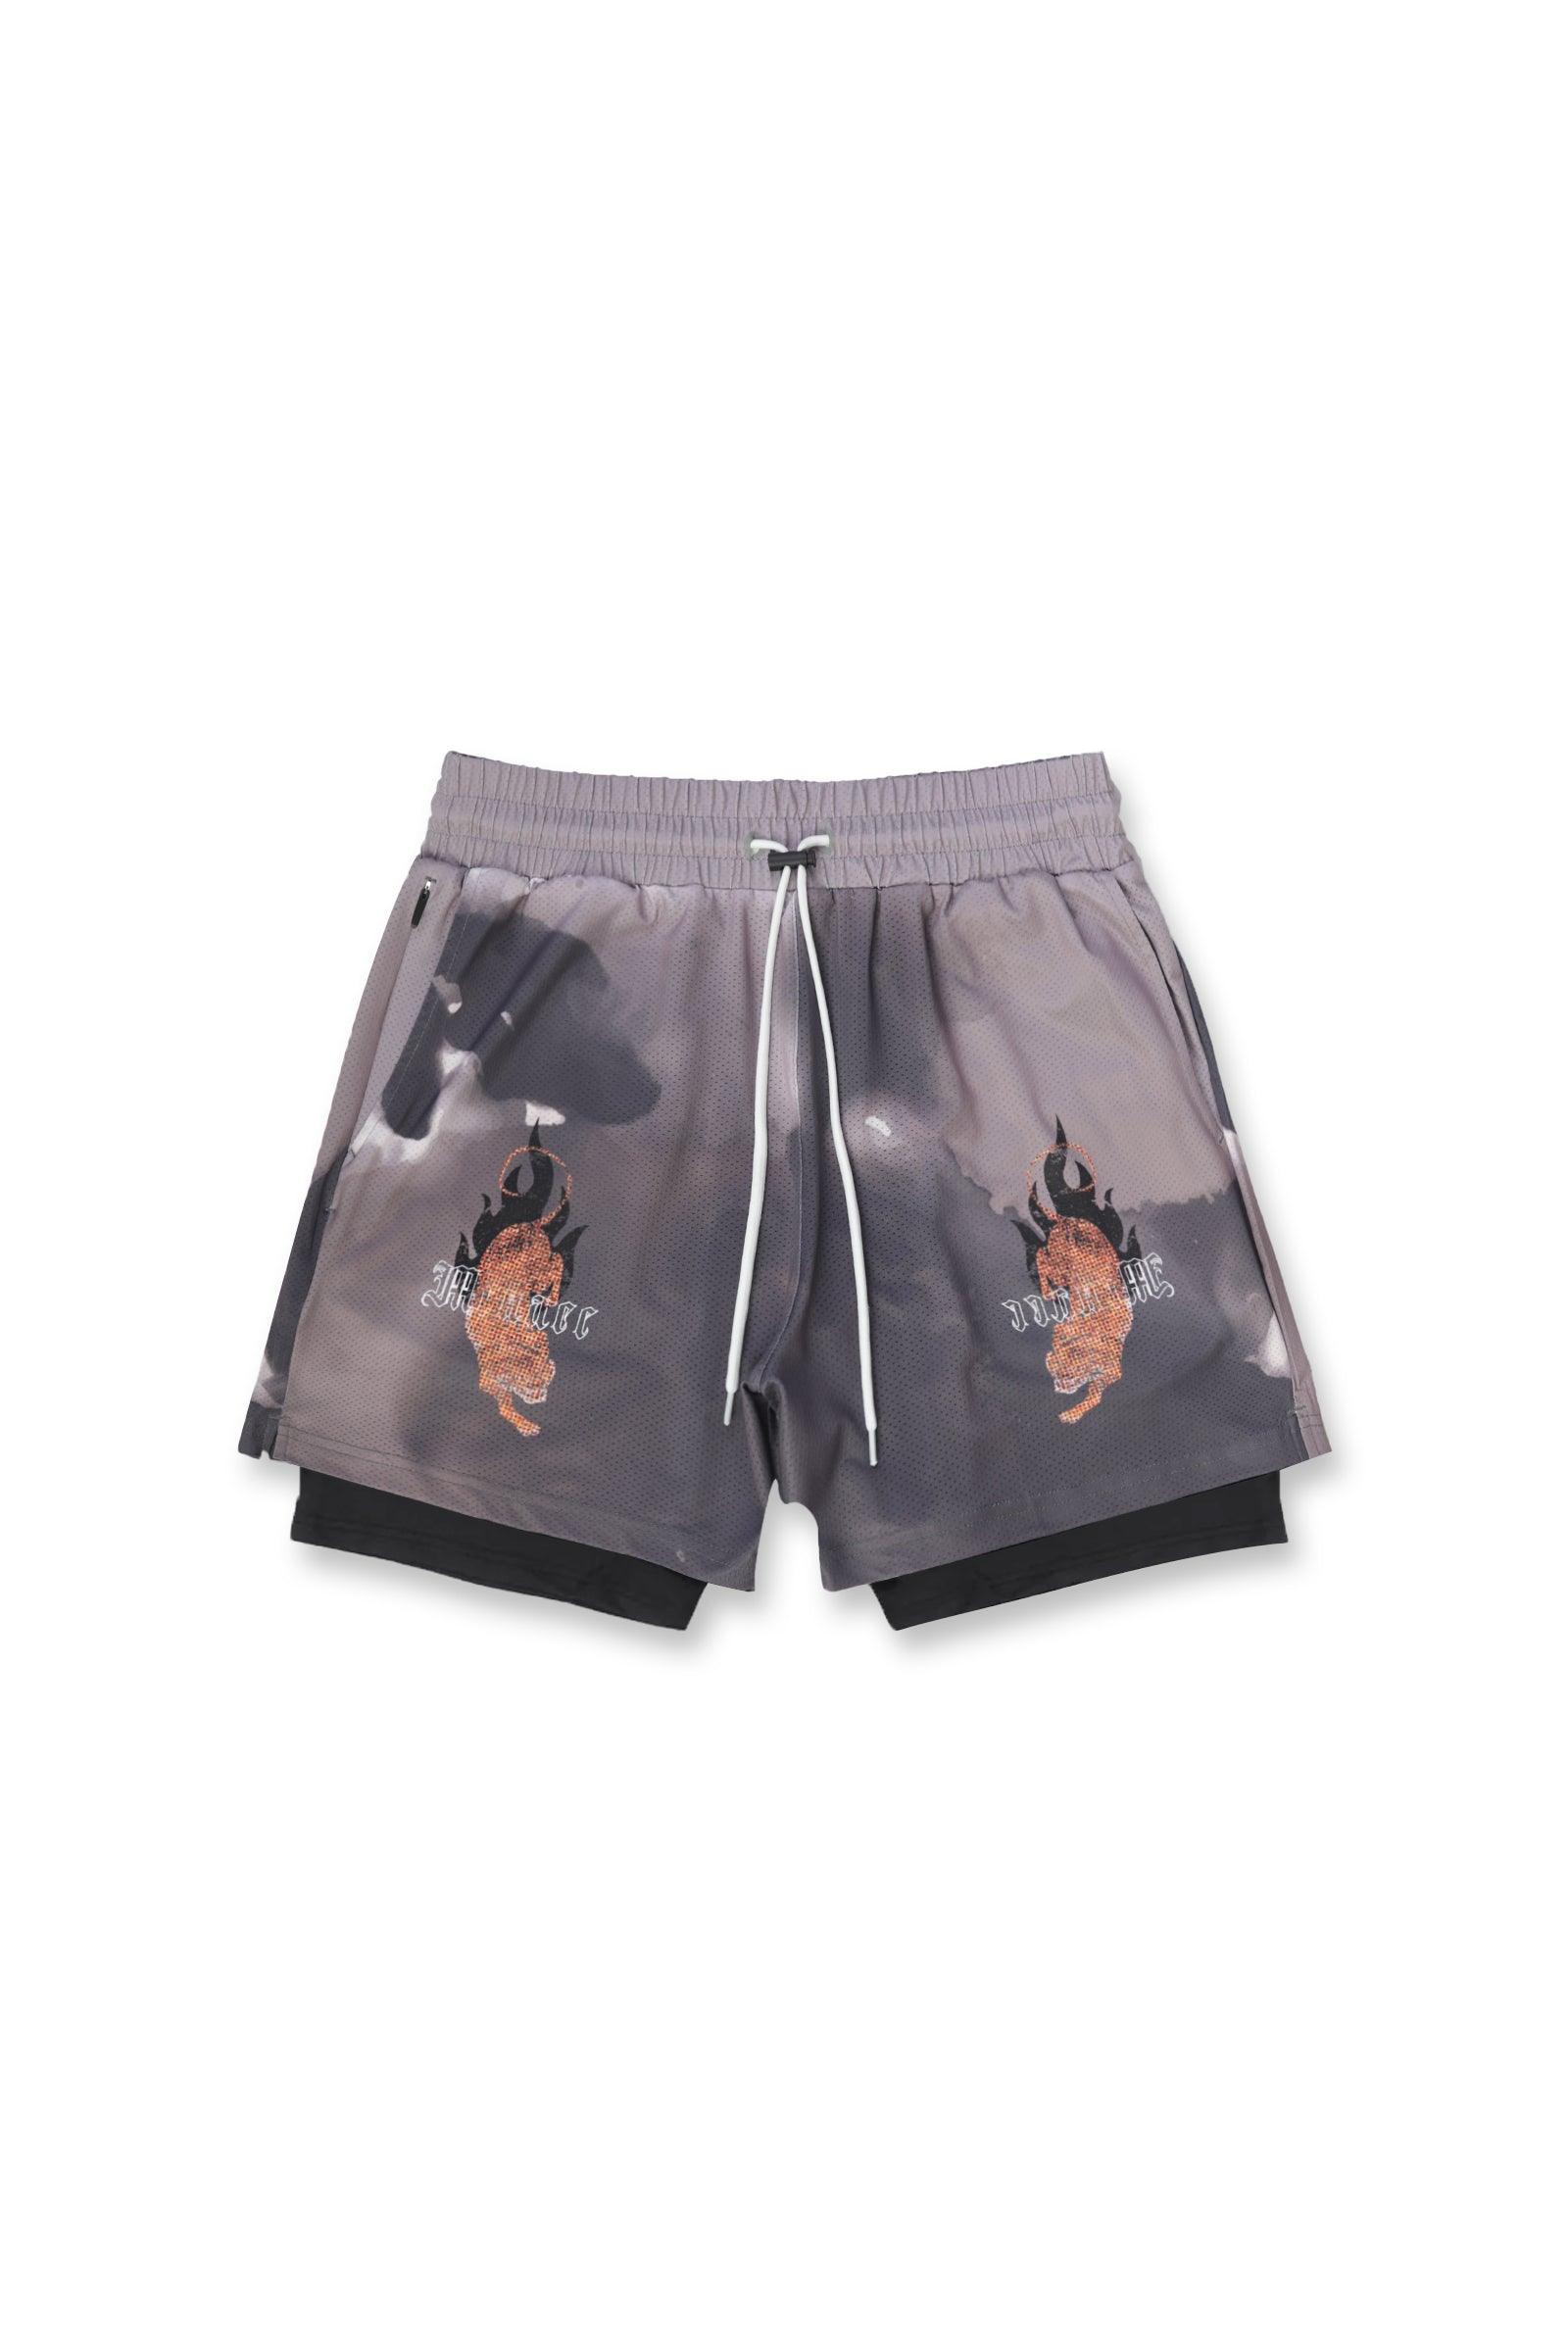 Pro 2 in 1 7" Training Shorts - Tiger Inferno - Jed North